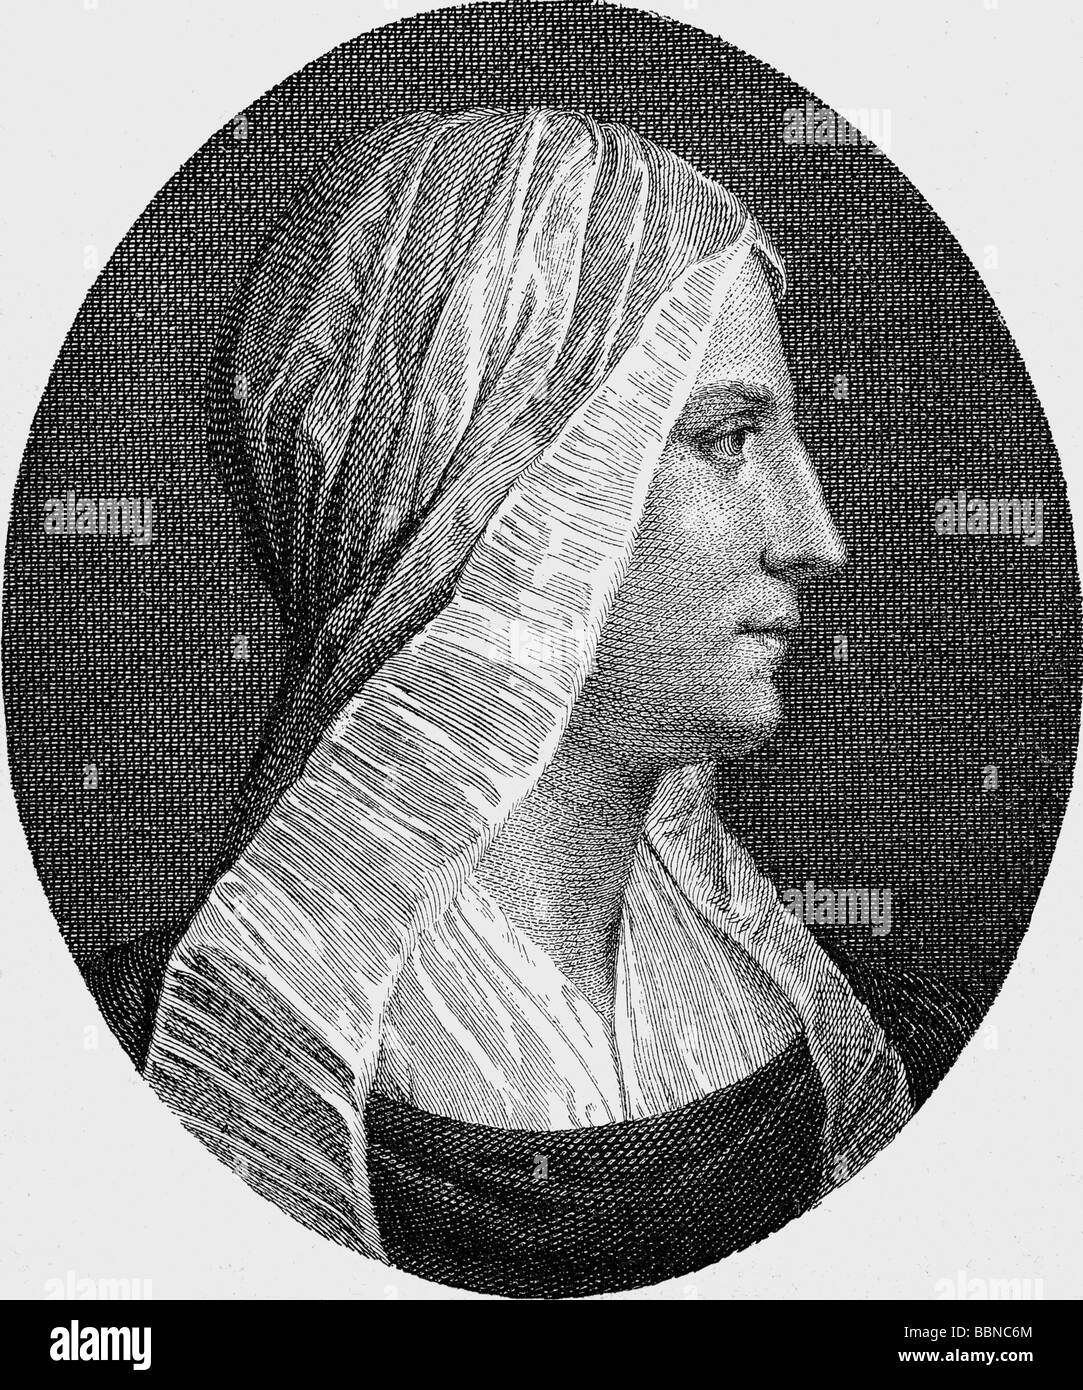 Colonna, Vittoria, 1492 - 25.2.1547, Marchioness of Pesaro, Italian author / writer (poet), portrait, side face, after contemporary drawing by Maria Longhi, wood engraving, 19th century, Stock Photo